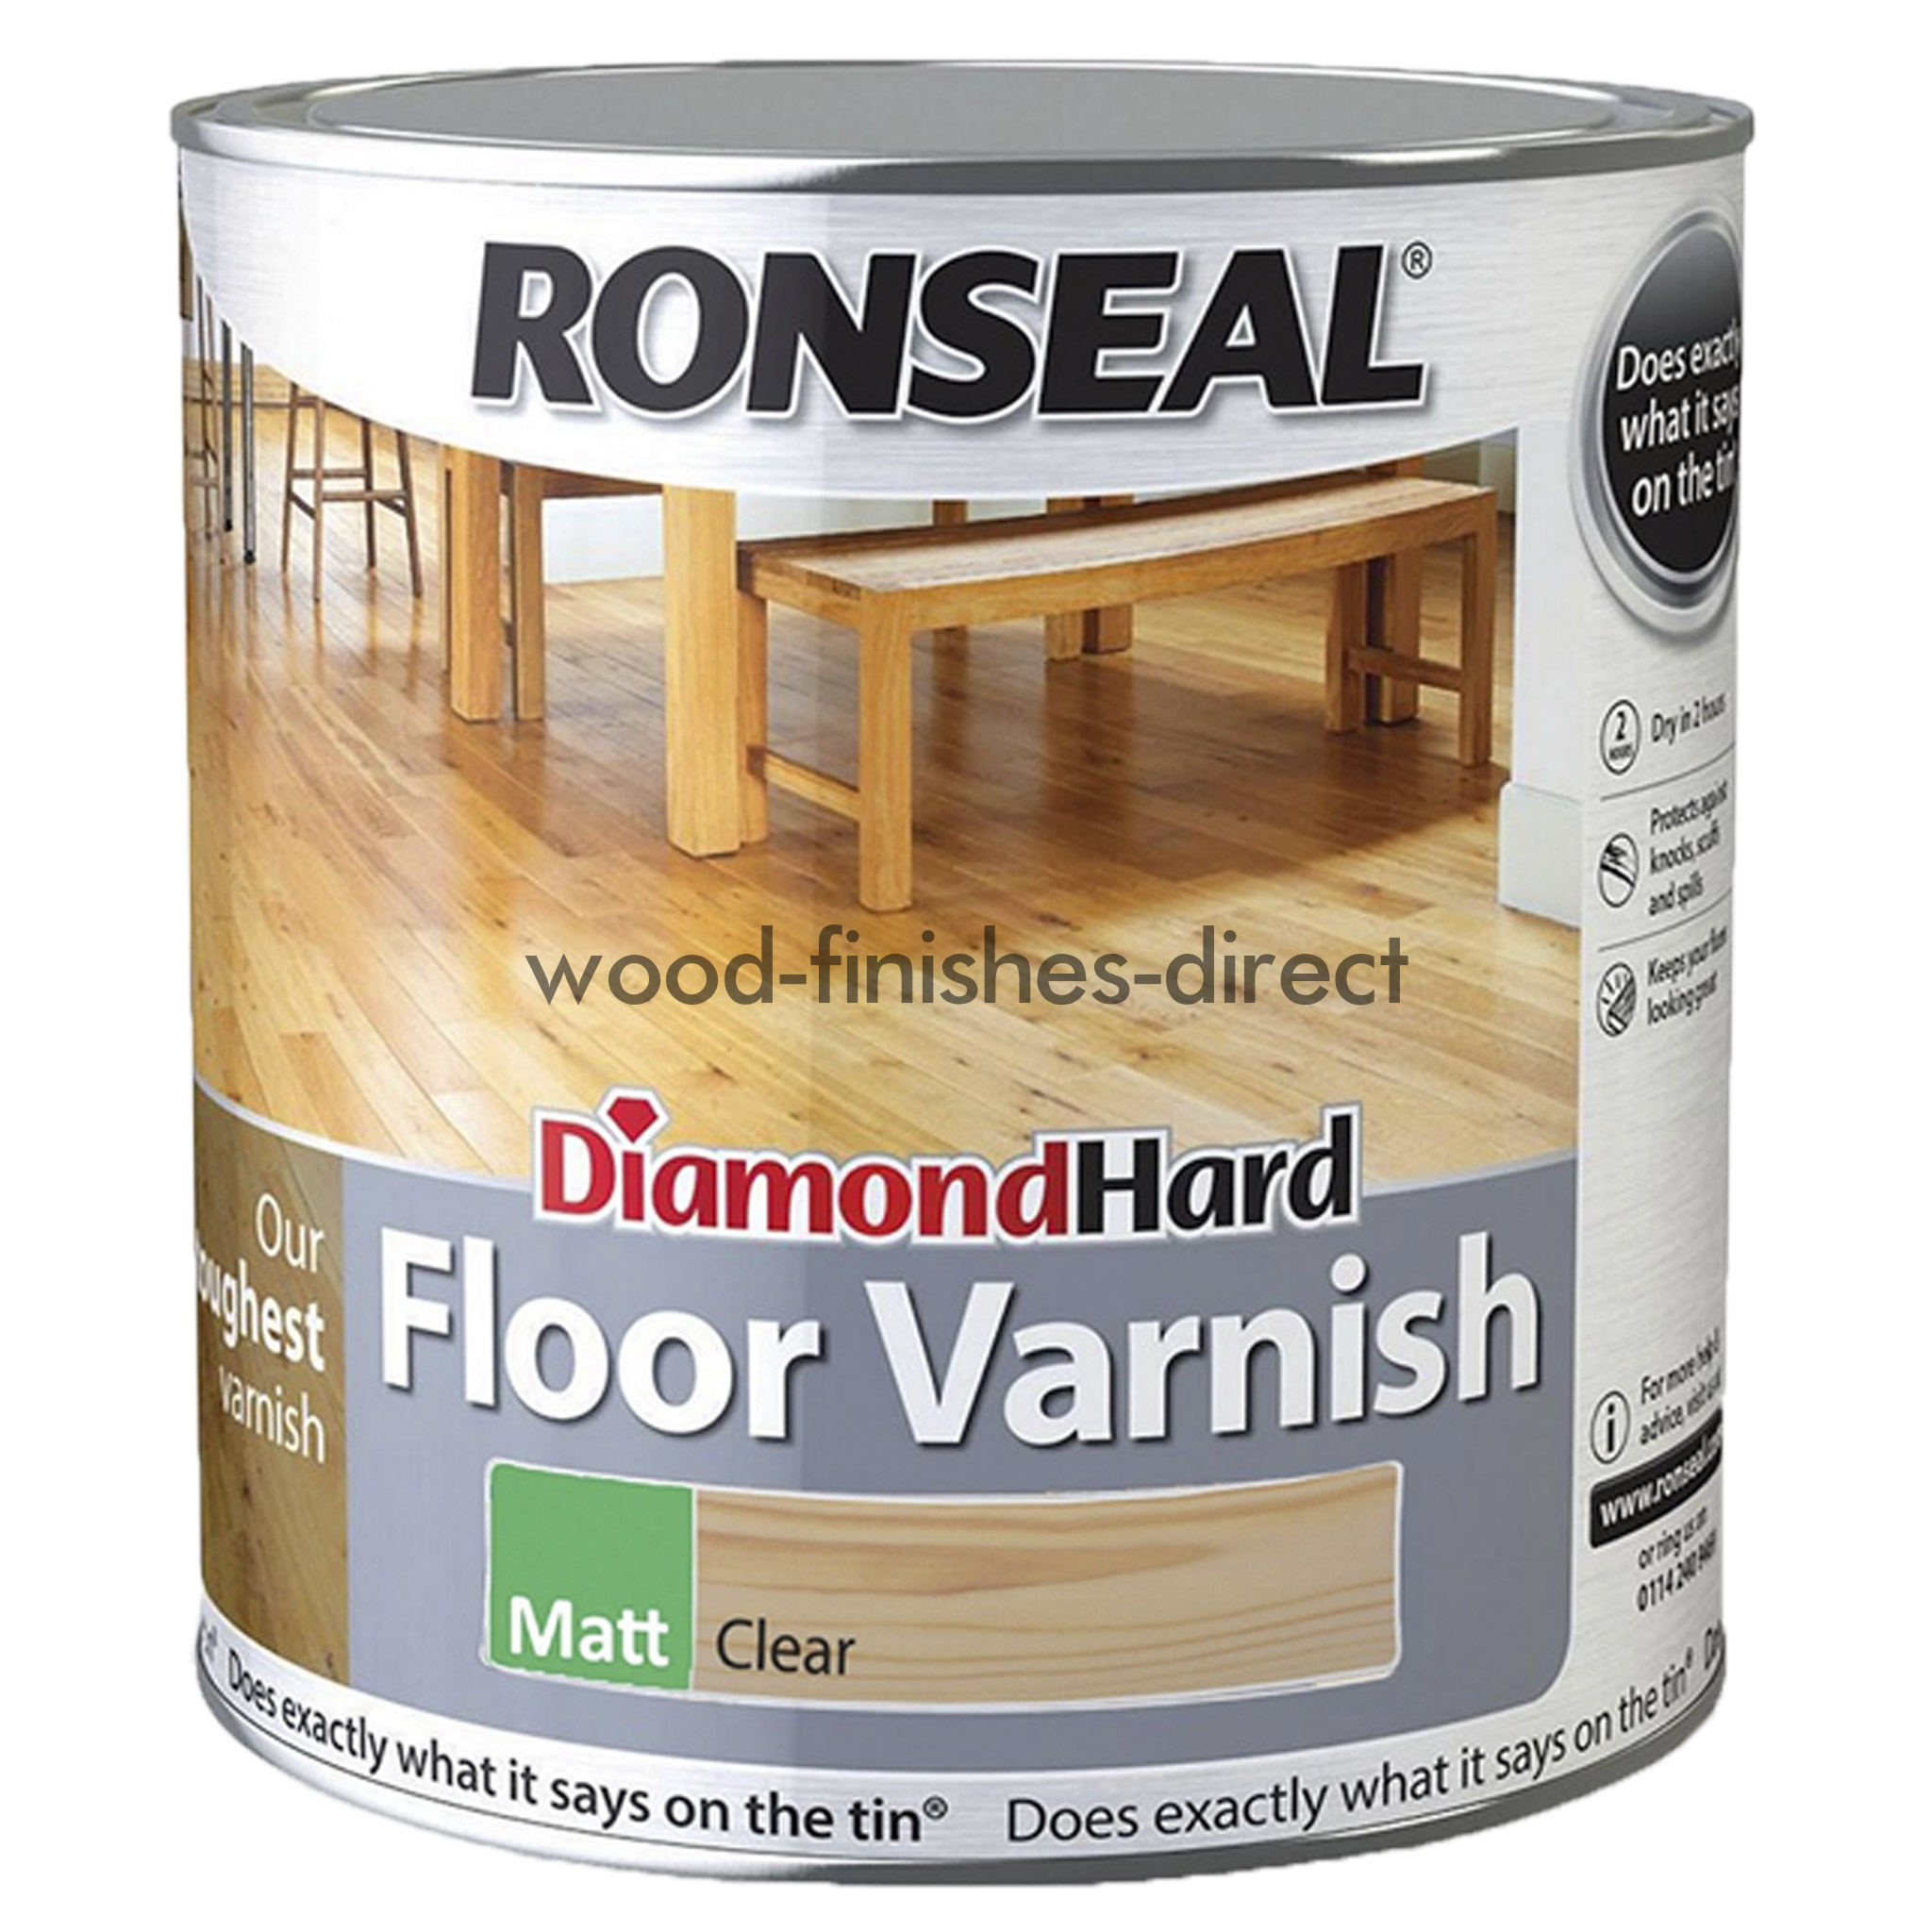 How to Use Interior and Exterior Wood Filler - Wood Finishes Direct